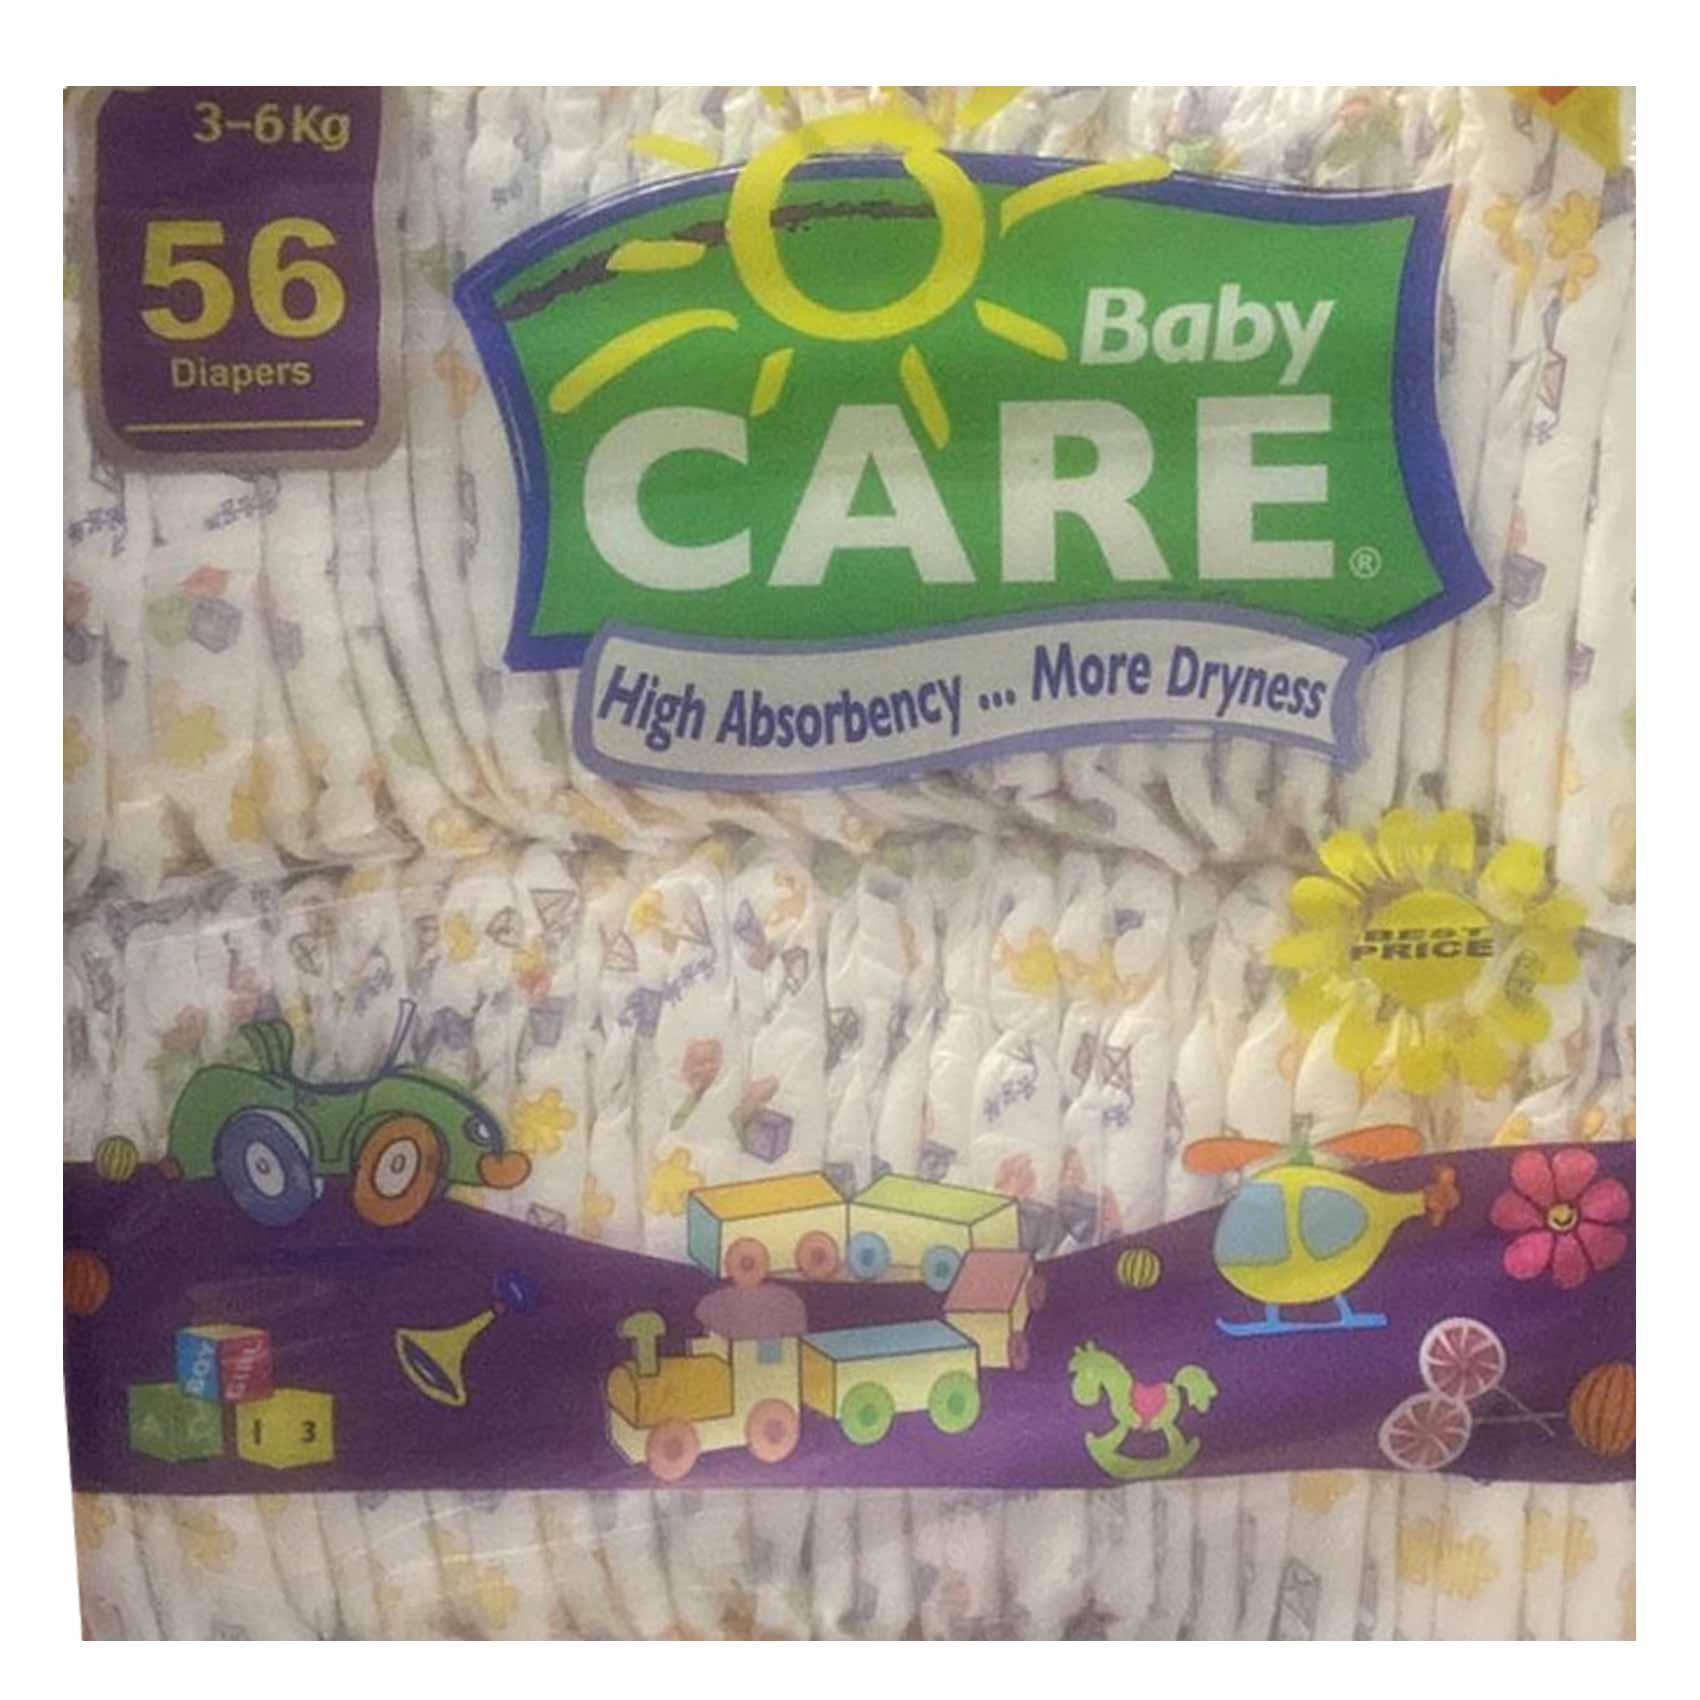 Sanita Baby Dreams Ultra Absorbent Diaper Small Size 3-6KG 56 Count